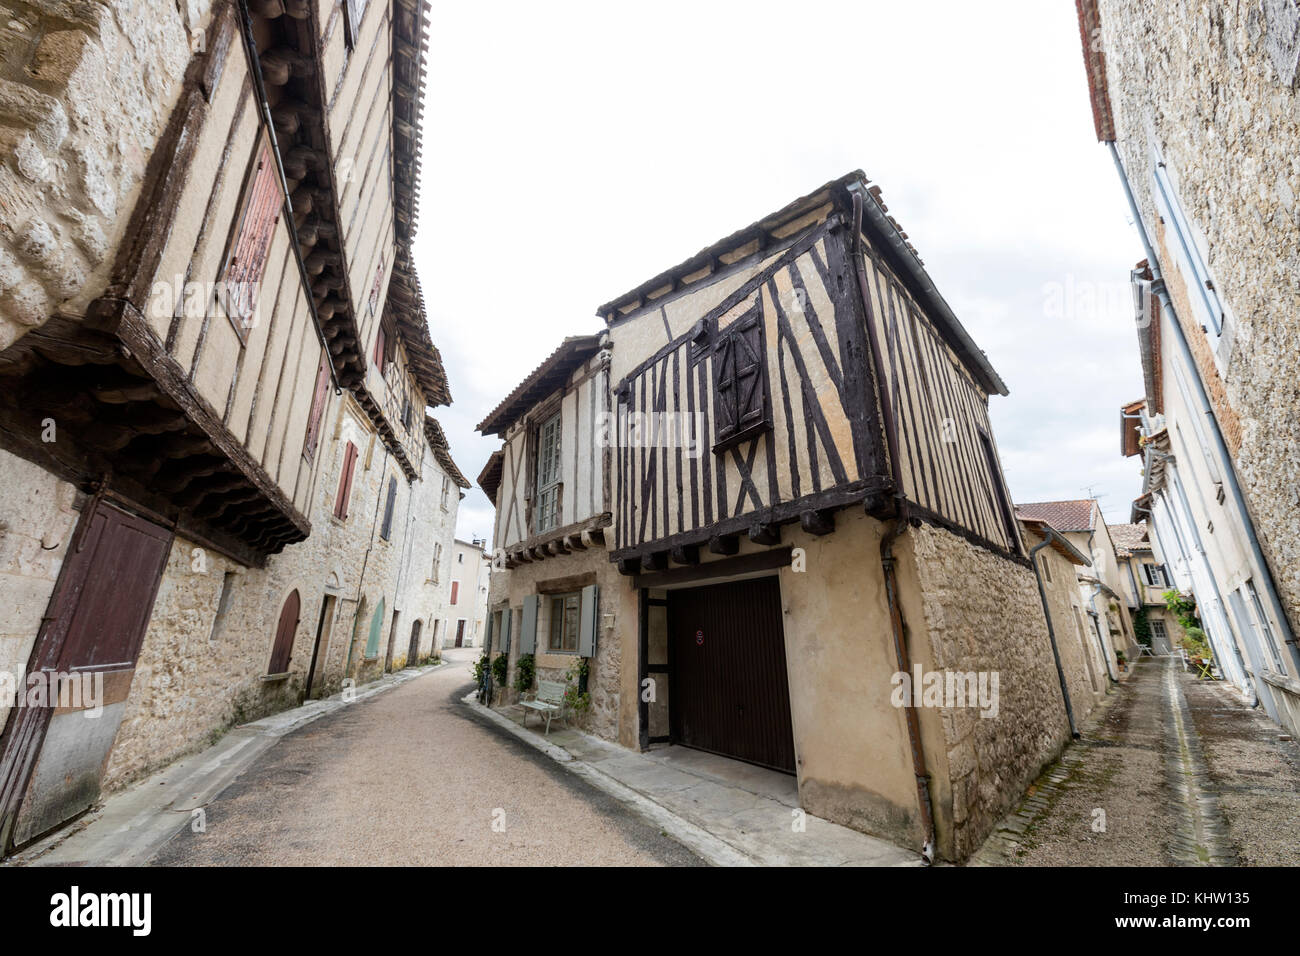 Issigeac, medieval village with timber framing houses  in Périgord, Nouvelle-Aquitaine, France Stock Photo